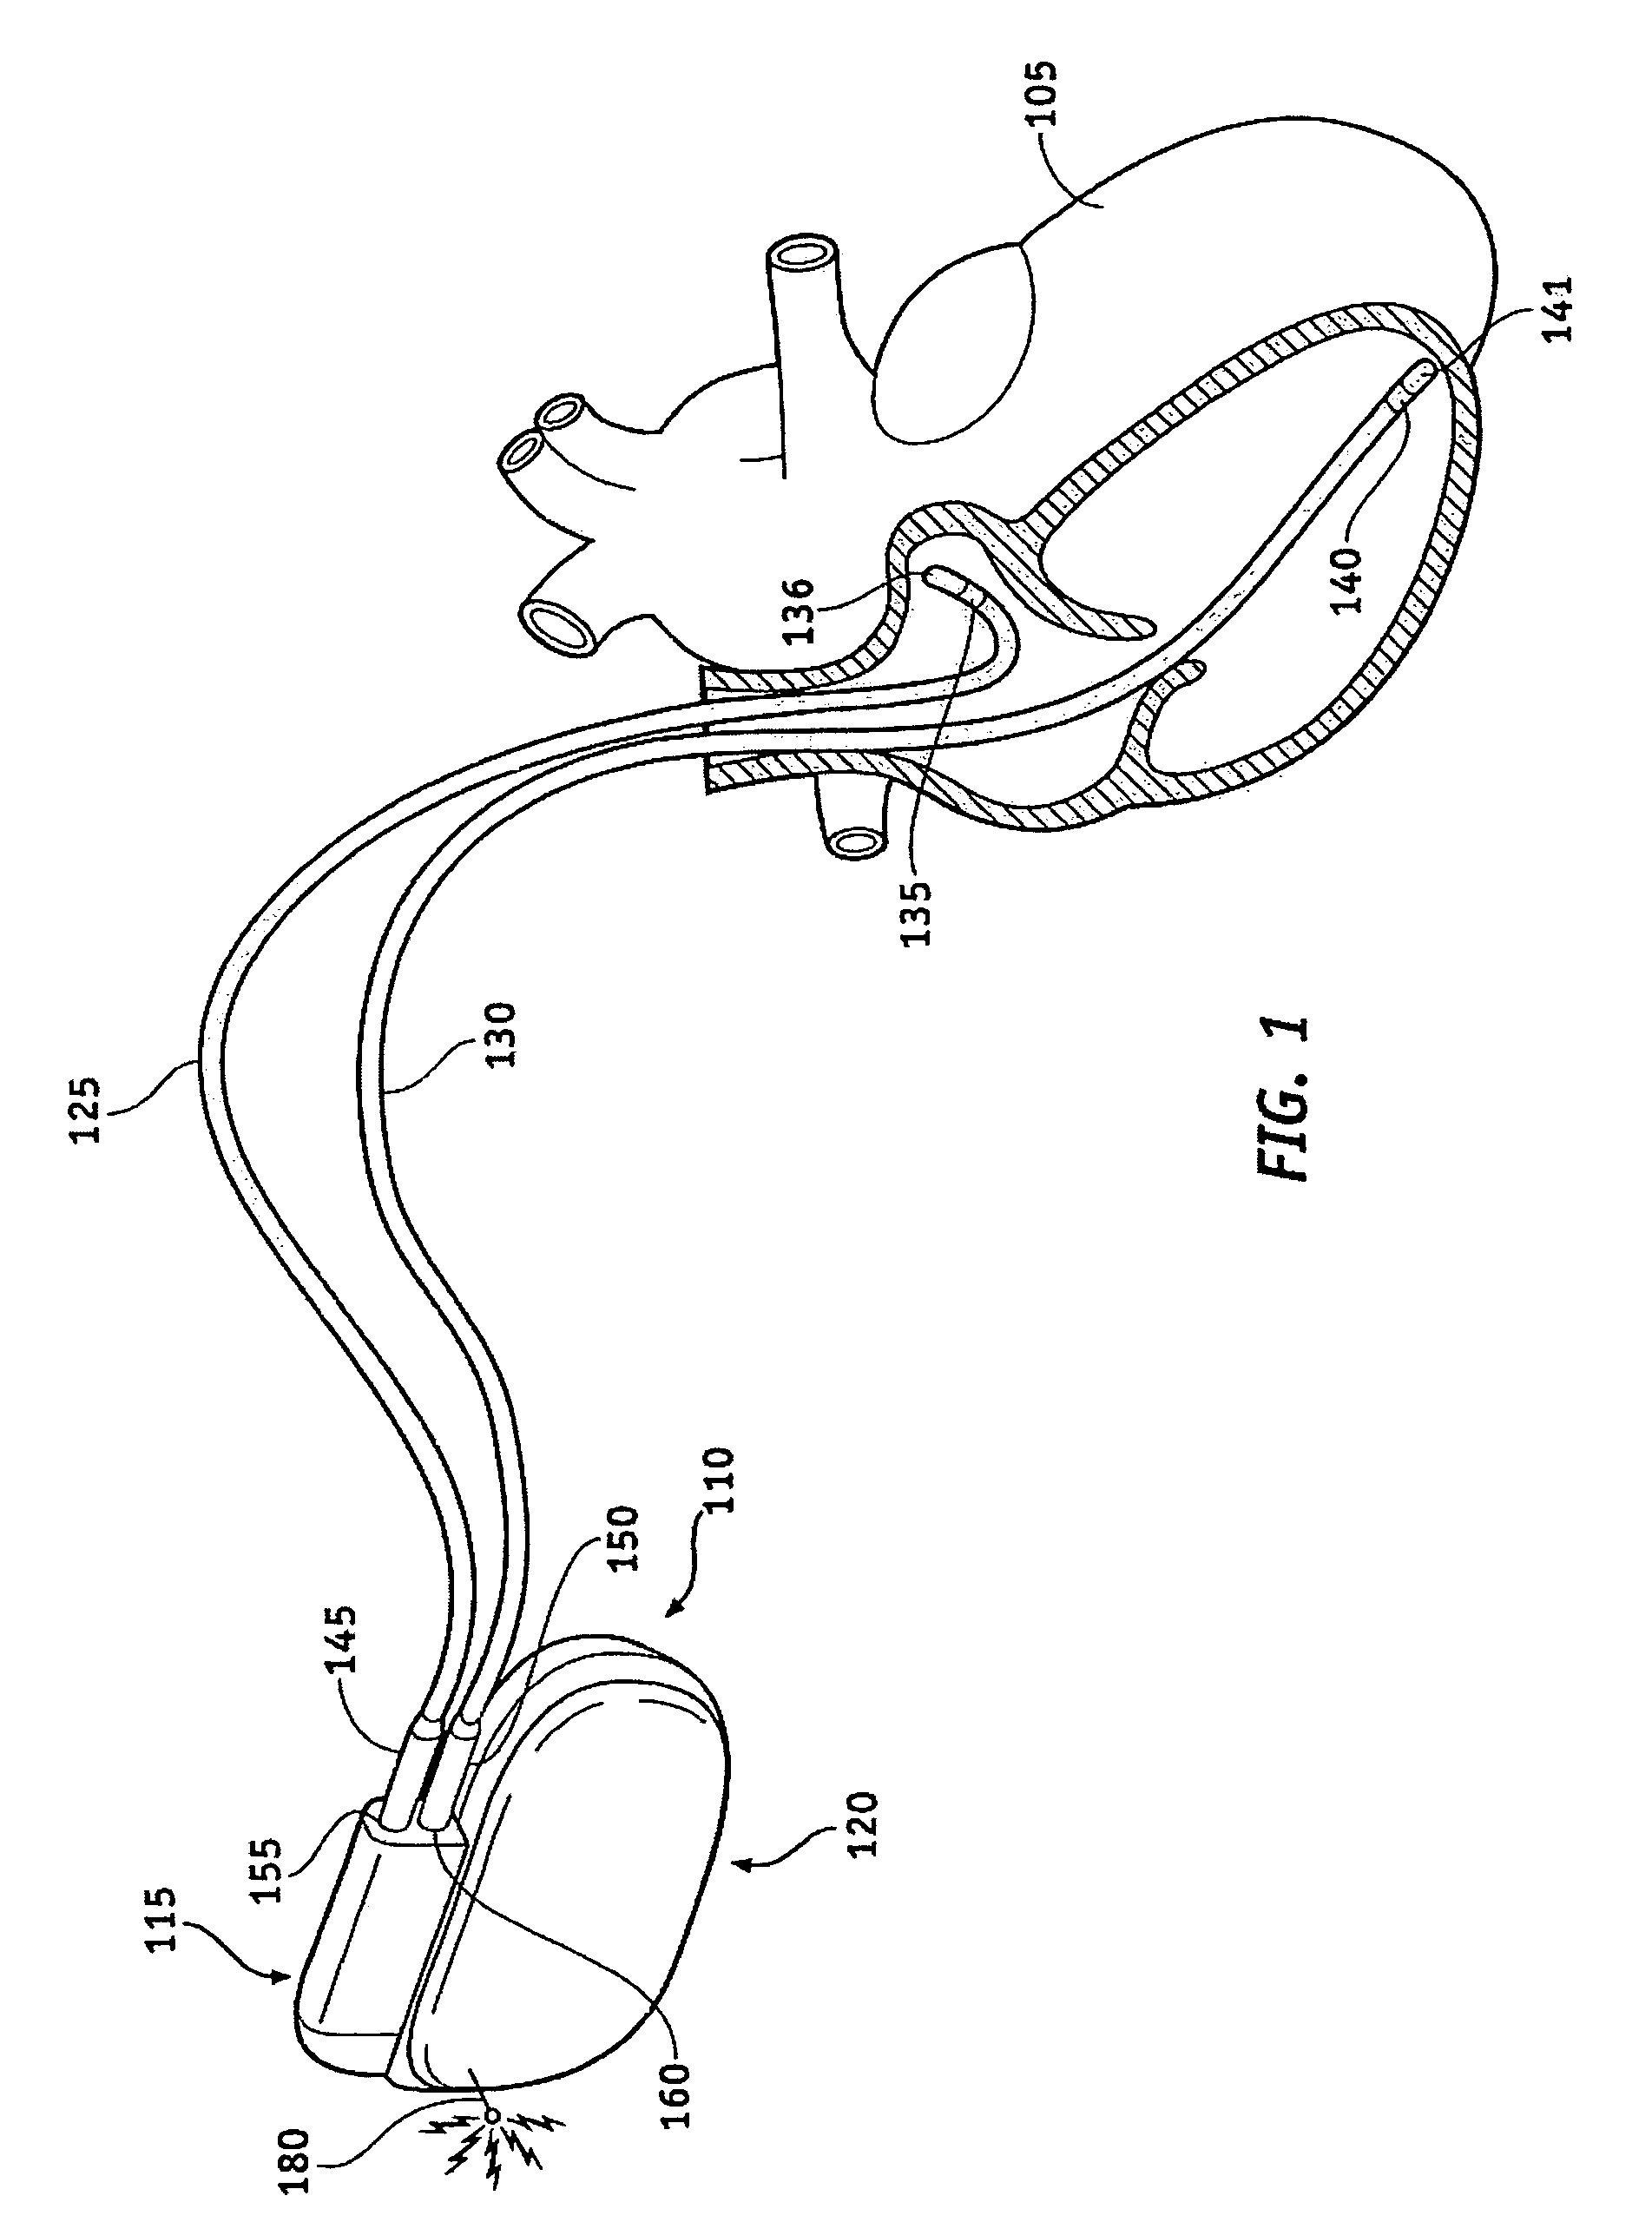 Radio frequency antenna flexible circuit interconnect with unique micro connectors